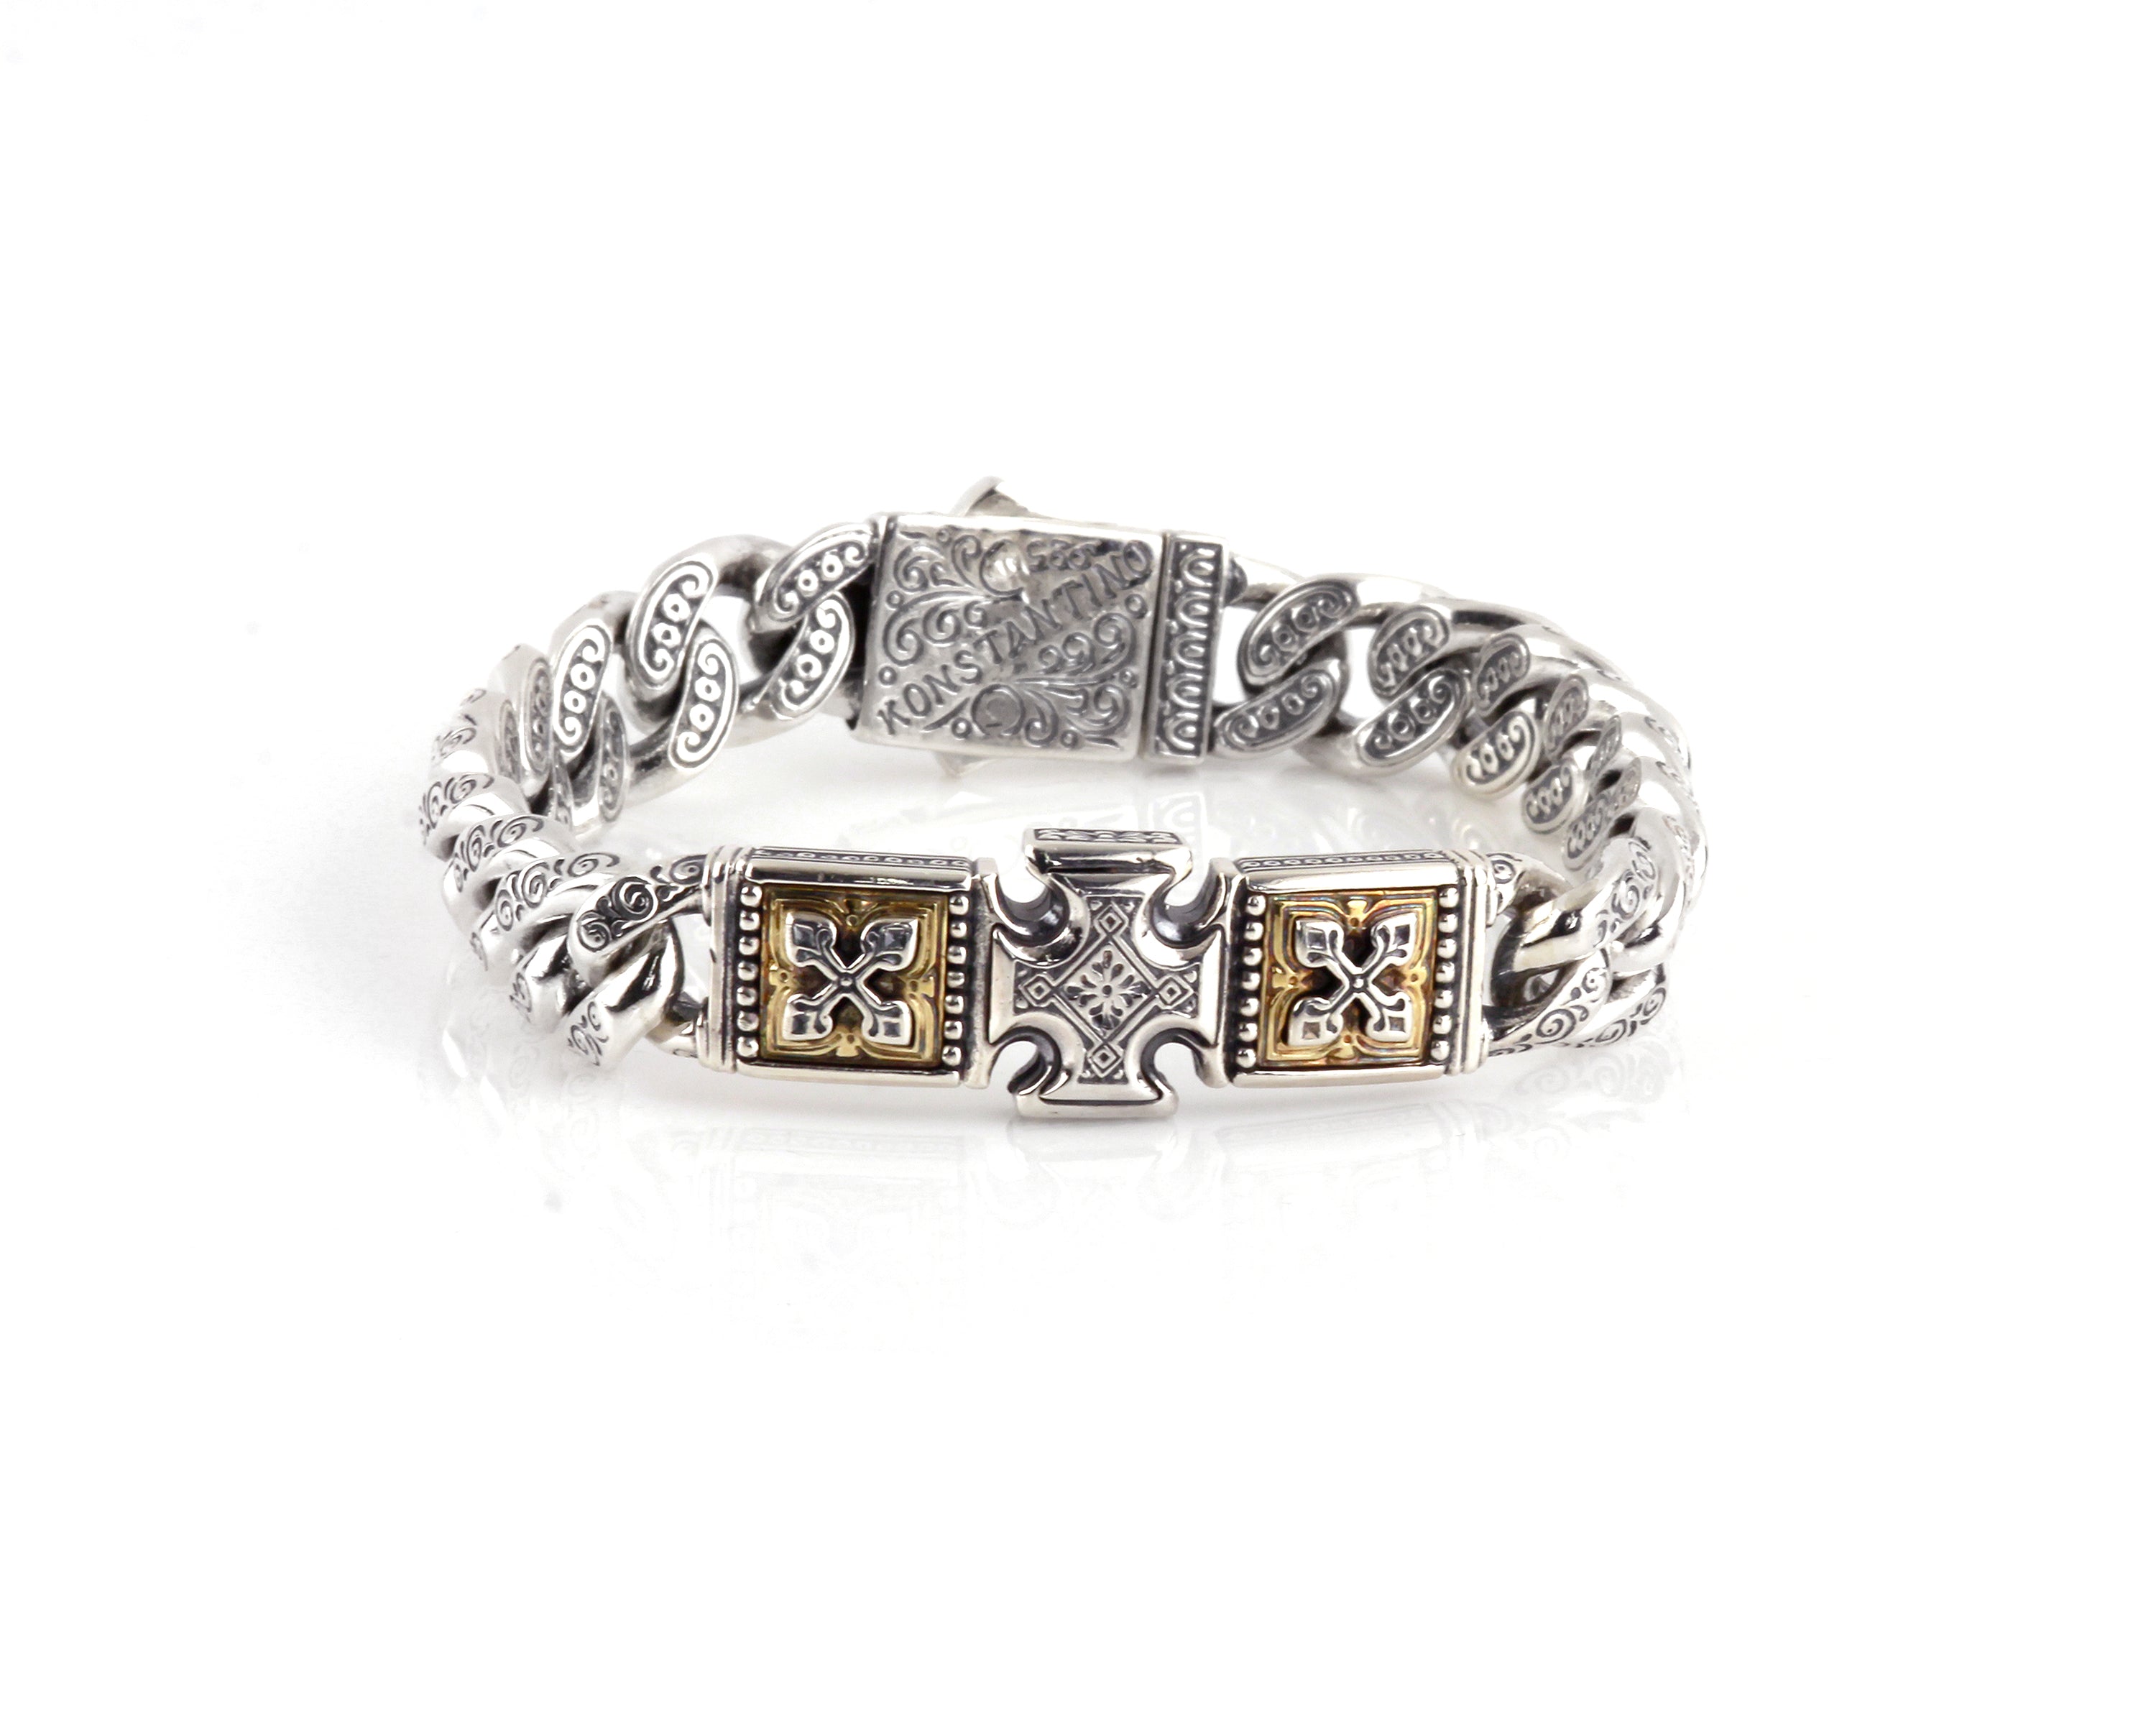 KONSTANTINO STERLING SILVER & BRONZE 4-POINT SQUARE DETAIL CROSS BRACELET FROM THE PHIDIAS COLLECTIO